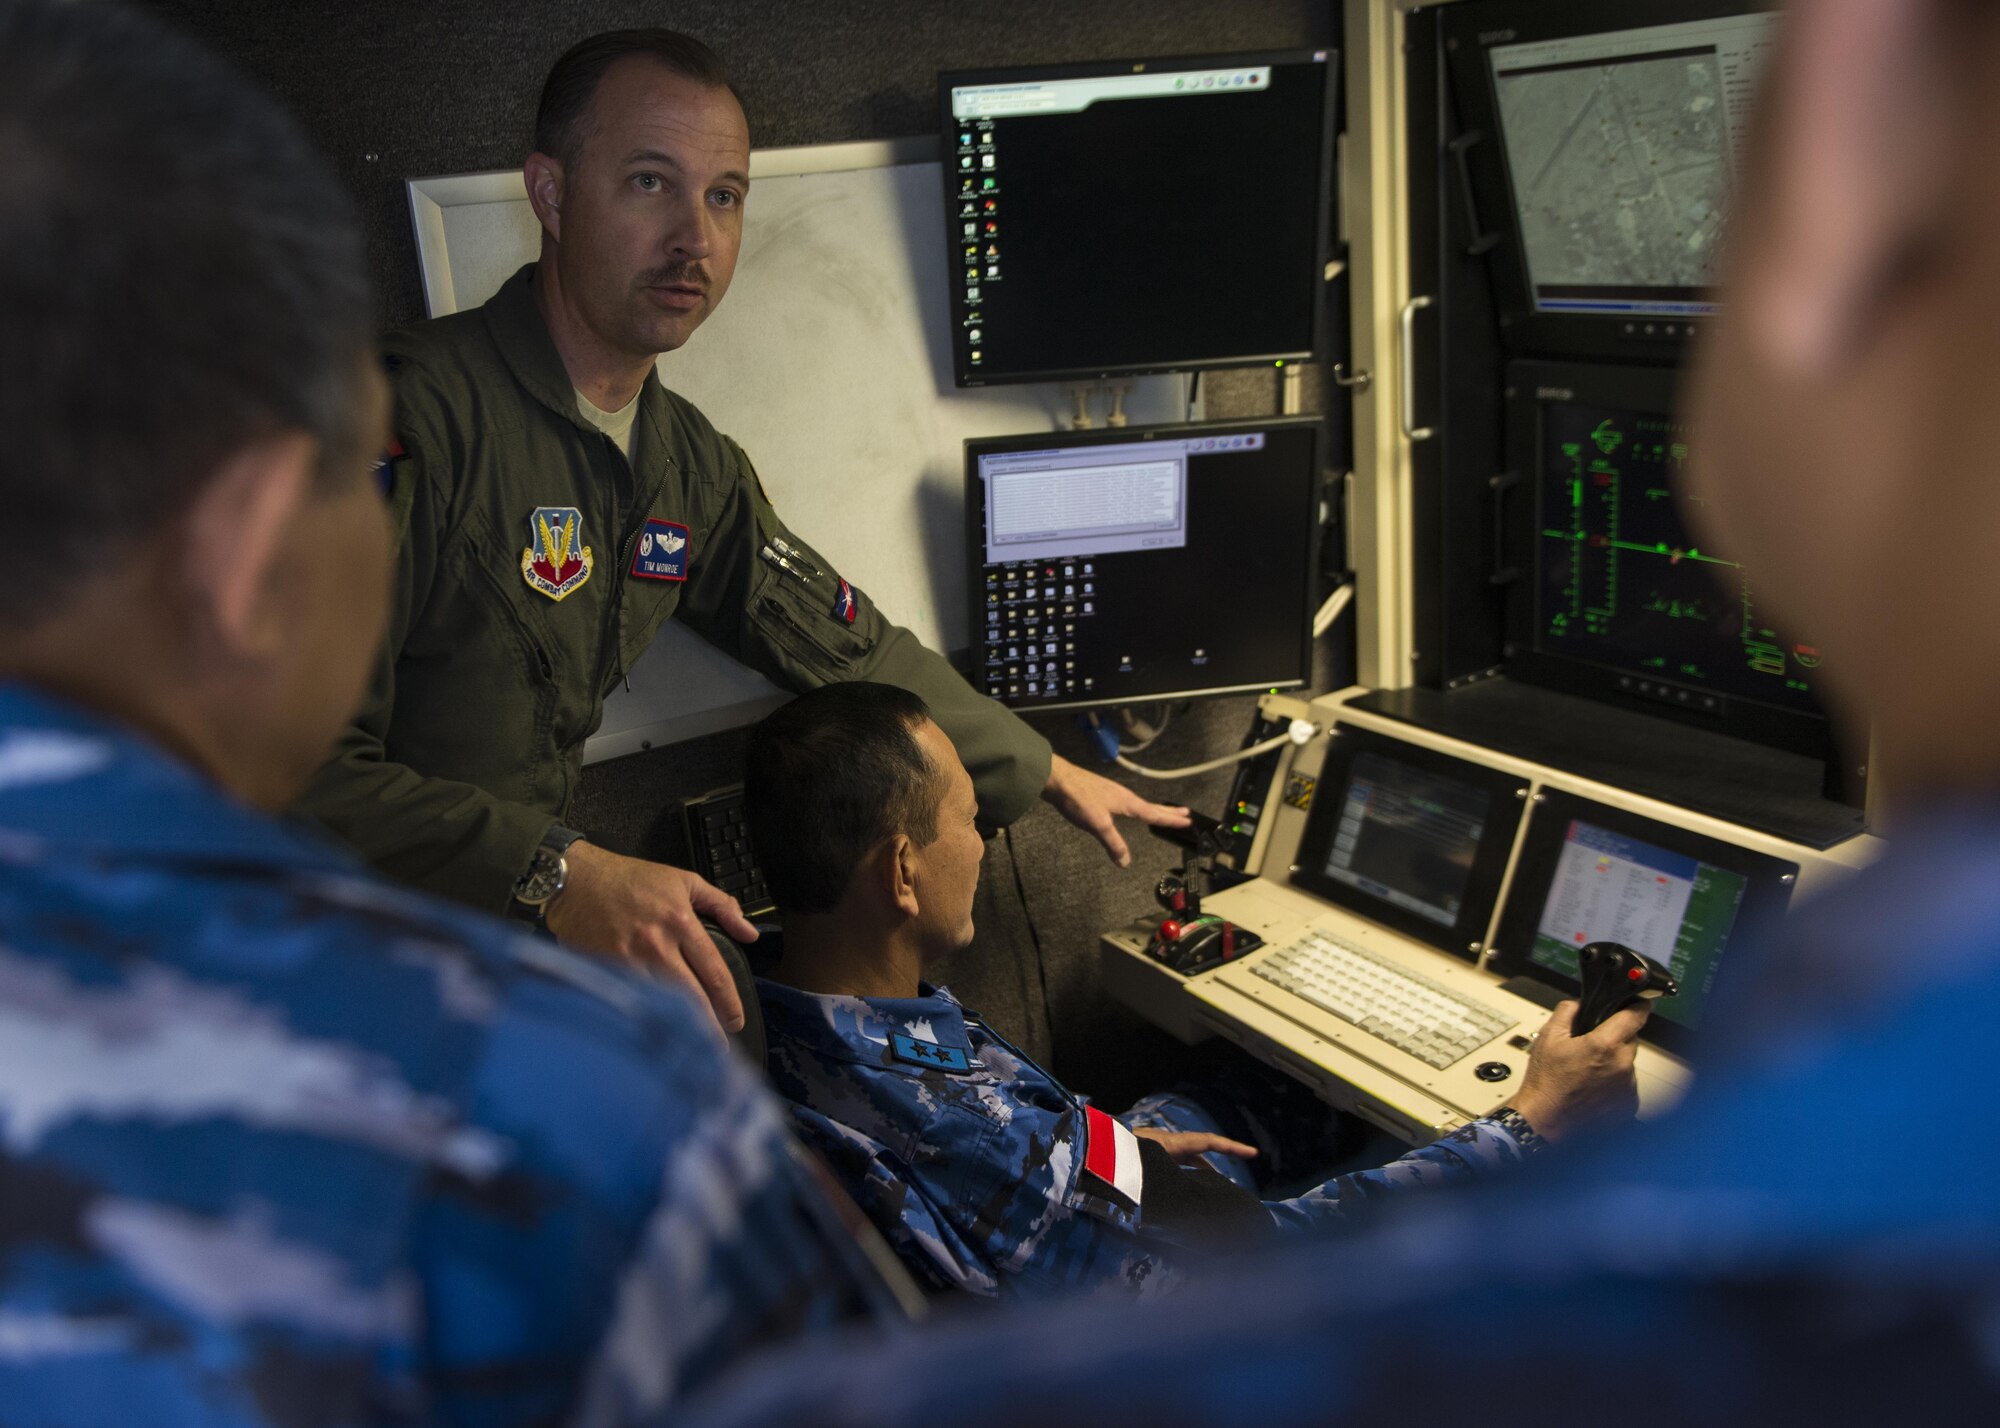 Lt. Col. Timothy Monroe, the 9th Attack Squadron commander, shows Maj. Gen. Dedy Permadi, an Indonesian Air Force officer, how to operate a remotely piloted aircraft, via a flight simulation, during a distinguished visitor tour at Holloman Air Force Base, N.M. on March 15, 2017. Members of the IDAF visited the MQ-9 Flight Training Unit and the 16th Training Squadron here to learn about RPA flight operations. (U.S. Air Force photo by Airman 1st Class Alexis P. Docherty)